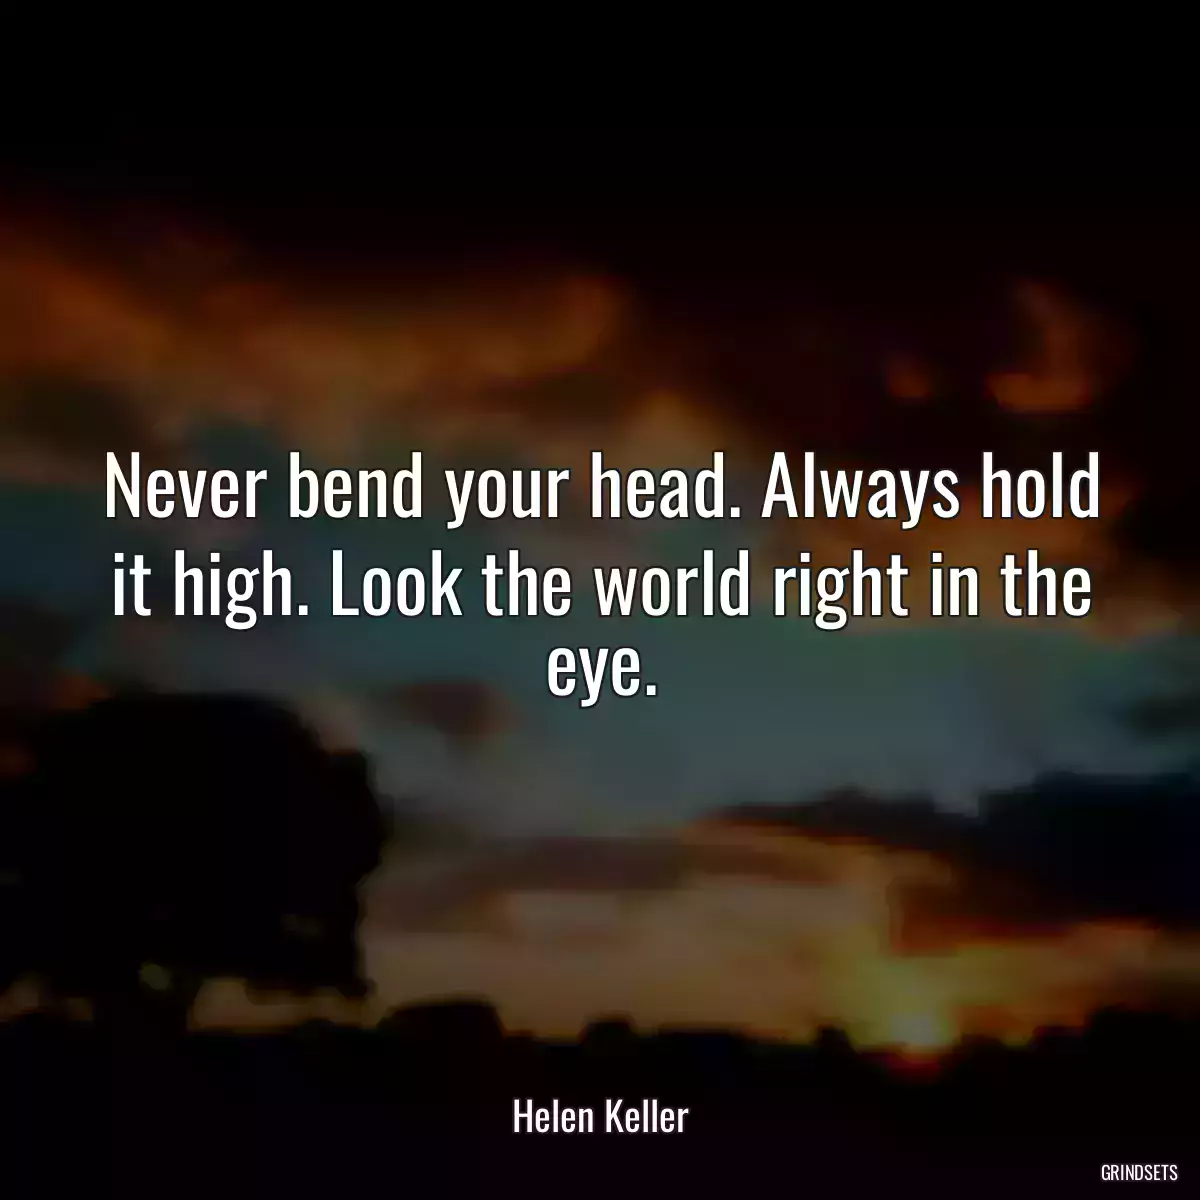 Never bend your head. Always hold it high. Look the world right in the eye.